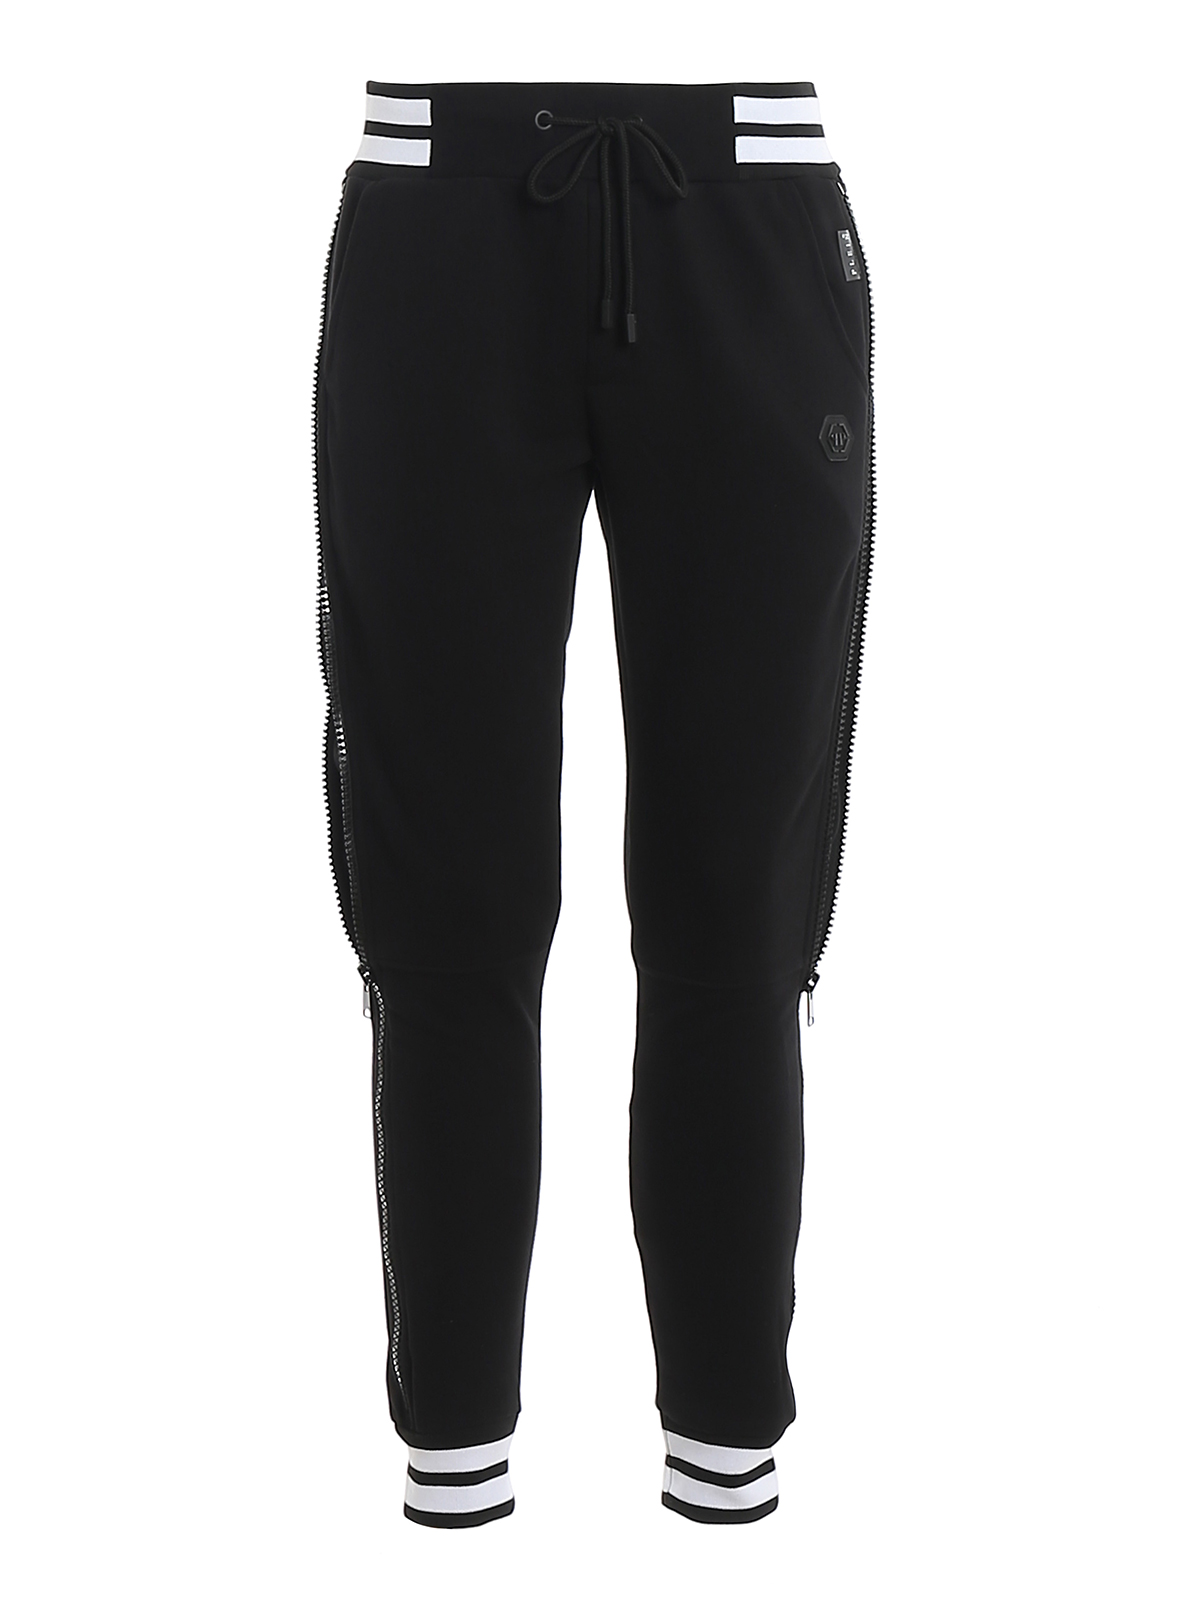 tracksuit bottoms with side zips